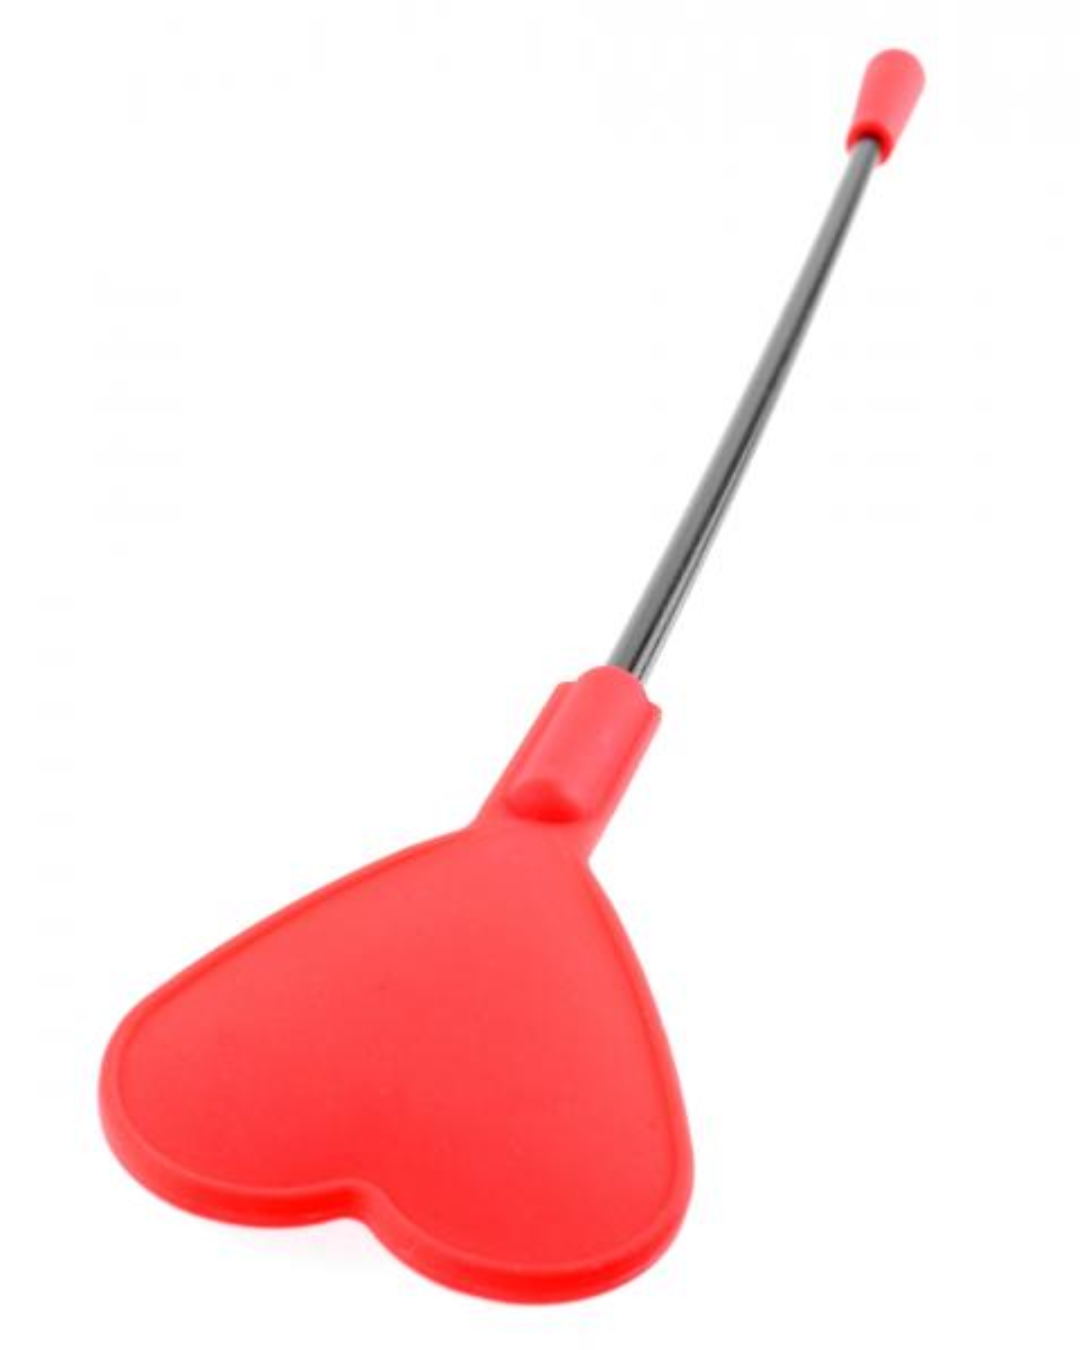 Fetish Fantasy Silicone Heart Crop 28 inches - Red close up of the tip